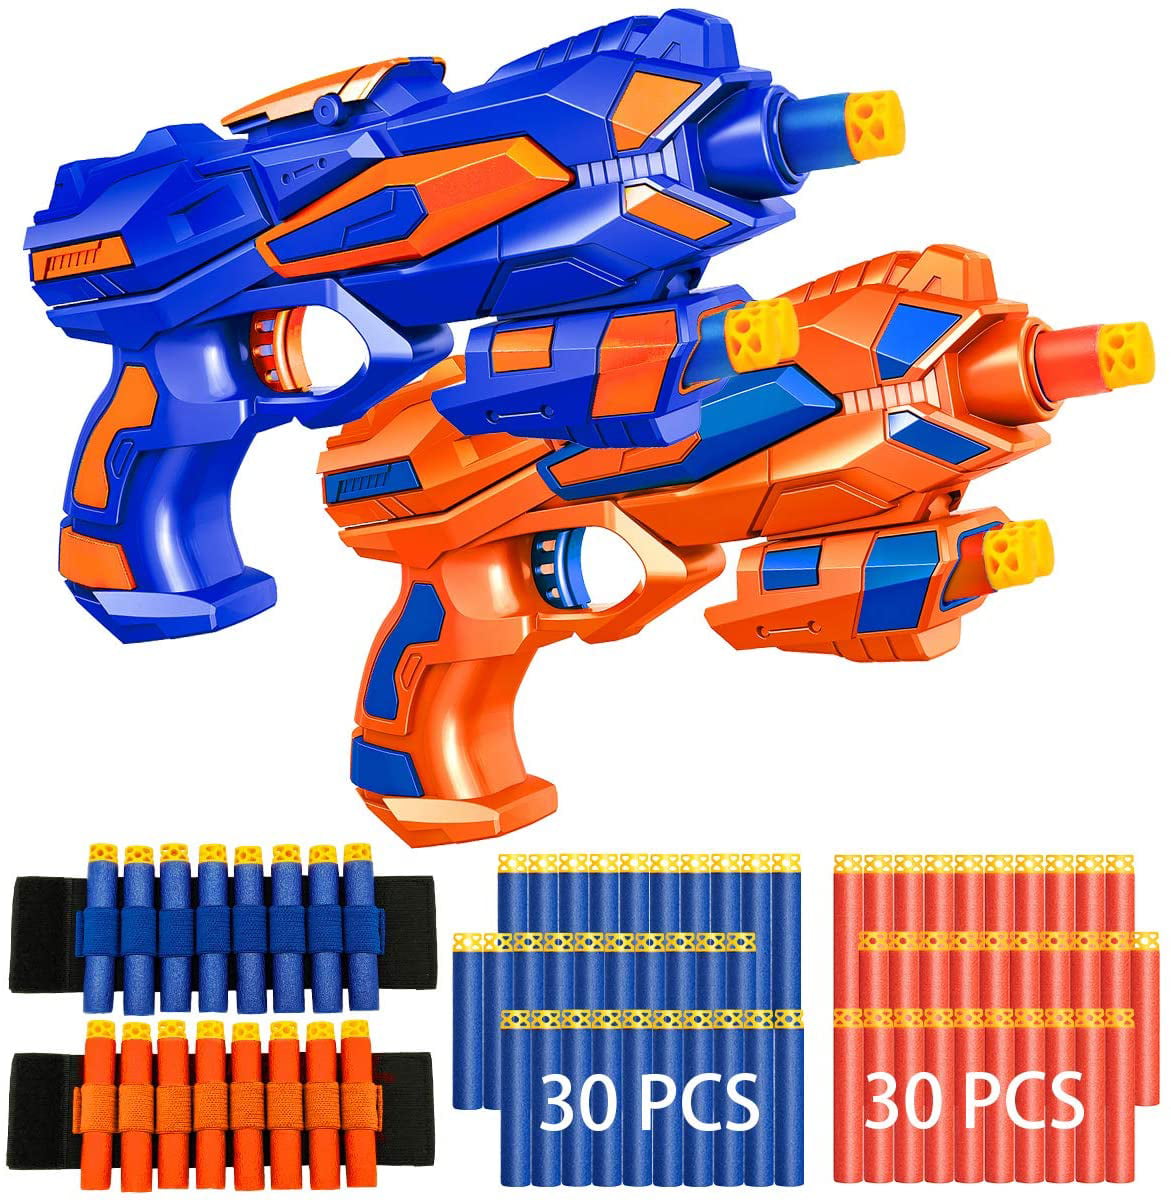 okk Blaster Toy Pistol for Boys Blaster Pistol with 60 PCS Foam Darts Bullets and One Shooting Target Soft Bullet Pistol for Kids Birthday Gifts Party Supplies Toys for 4 5 6 7 8 Year Old Boys Girls 